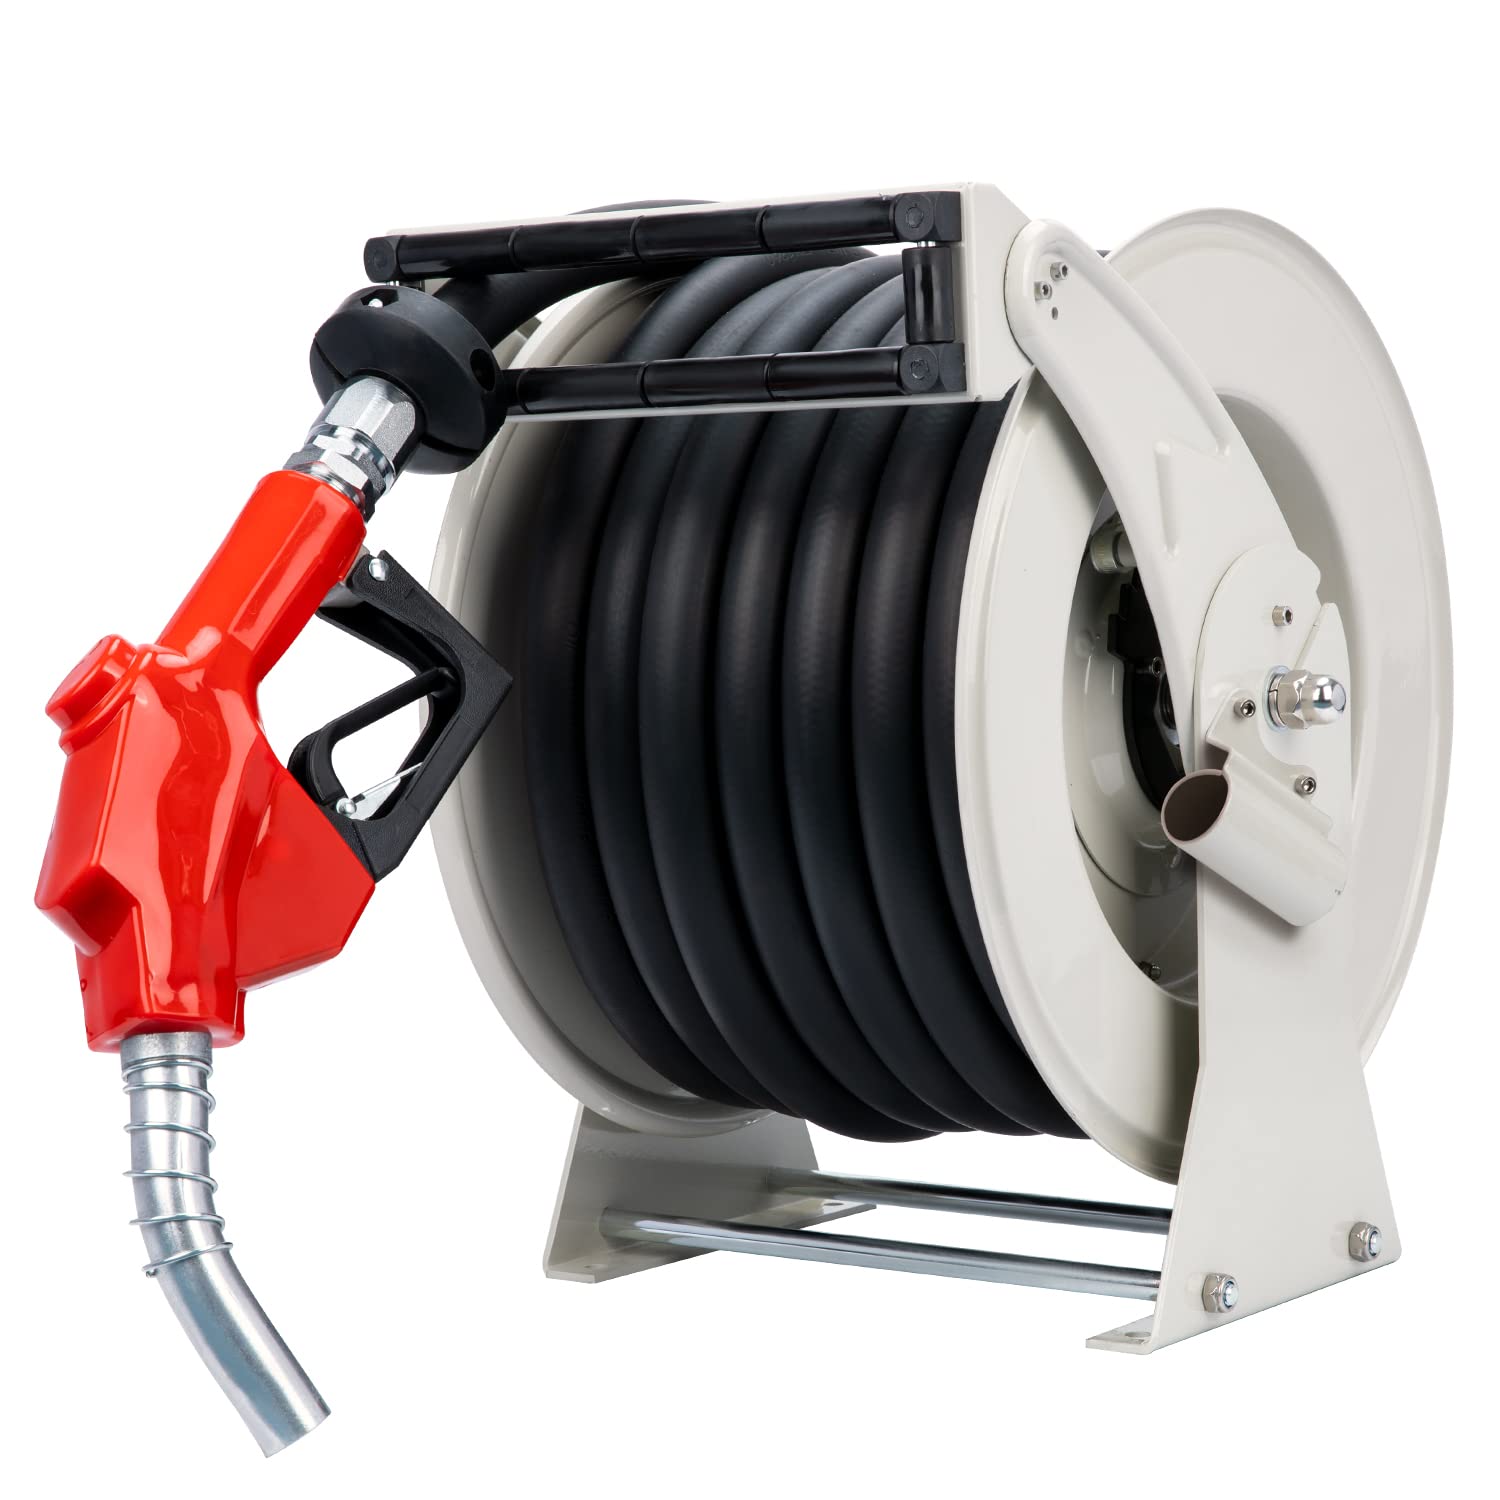 General Pump D30002 3/8 x 100' Steel Hose Reel with Swivel Arm and  Mounting Bracket, 4000 PSI